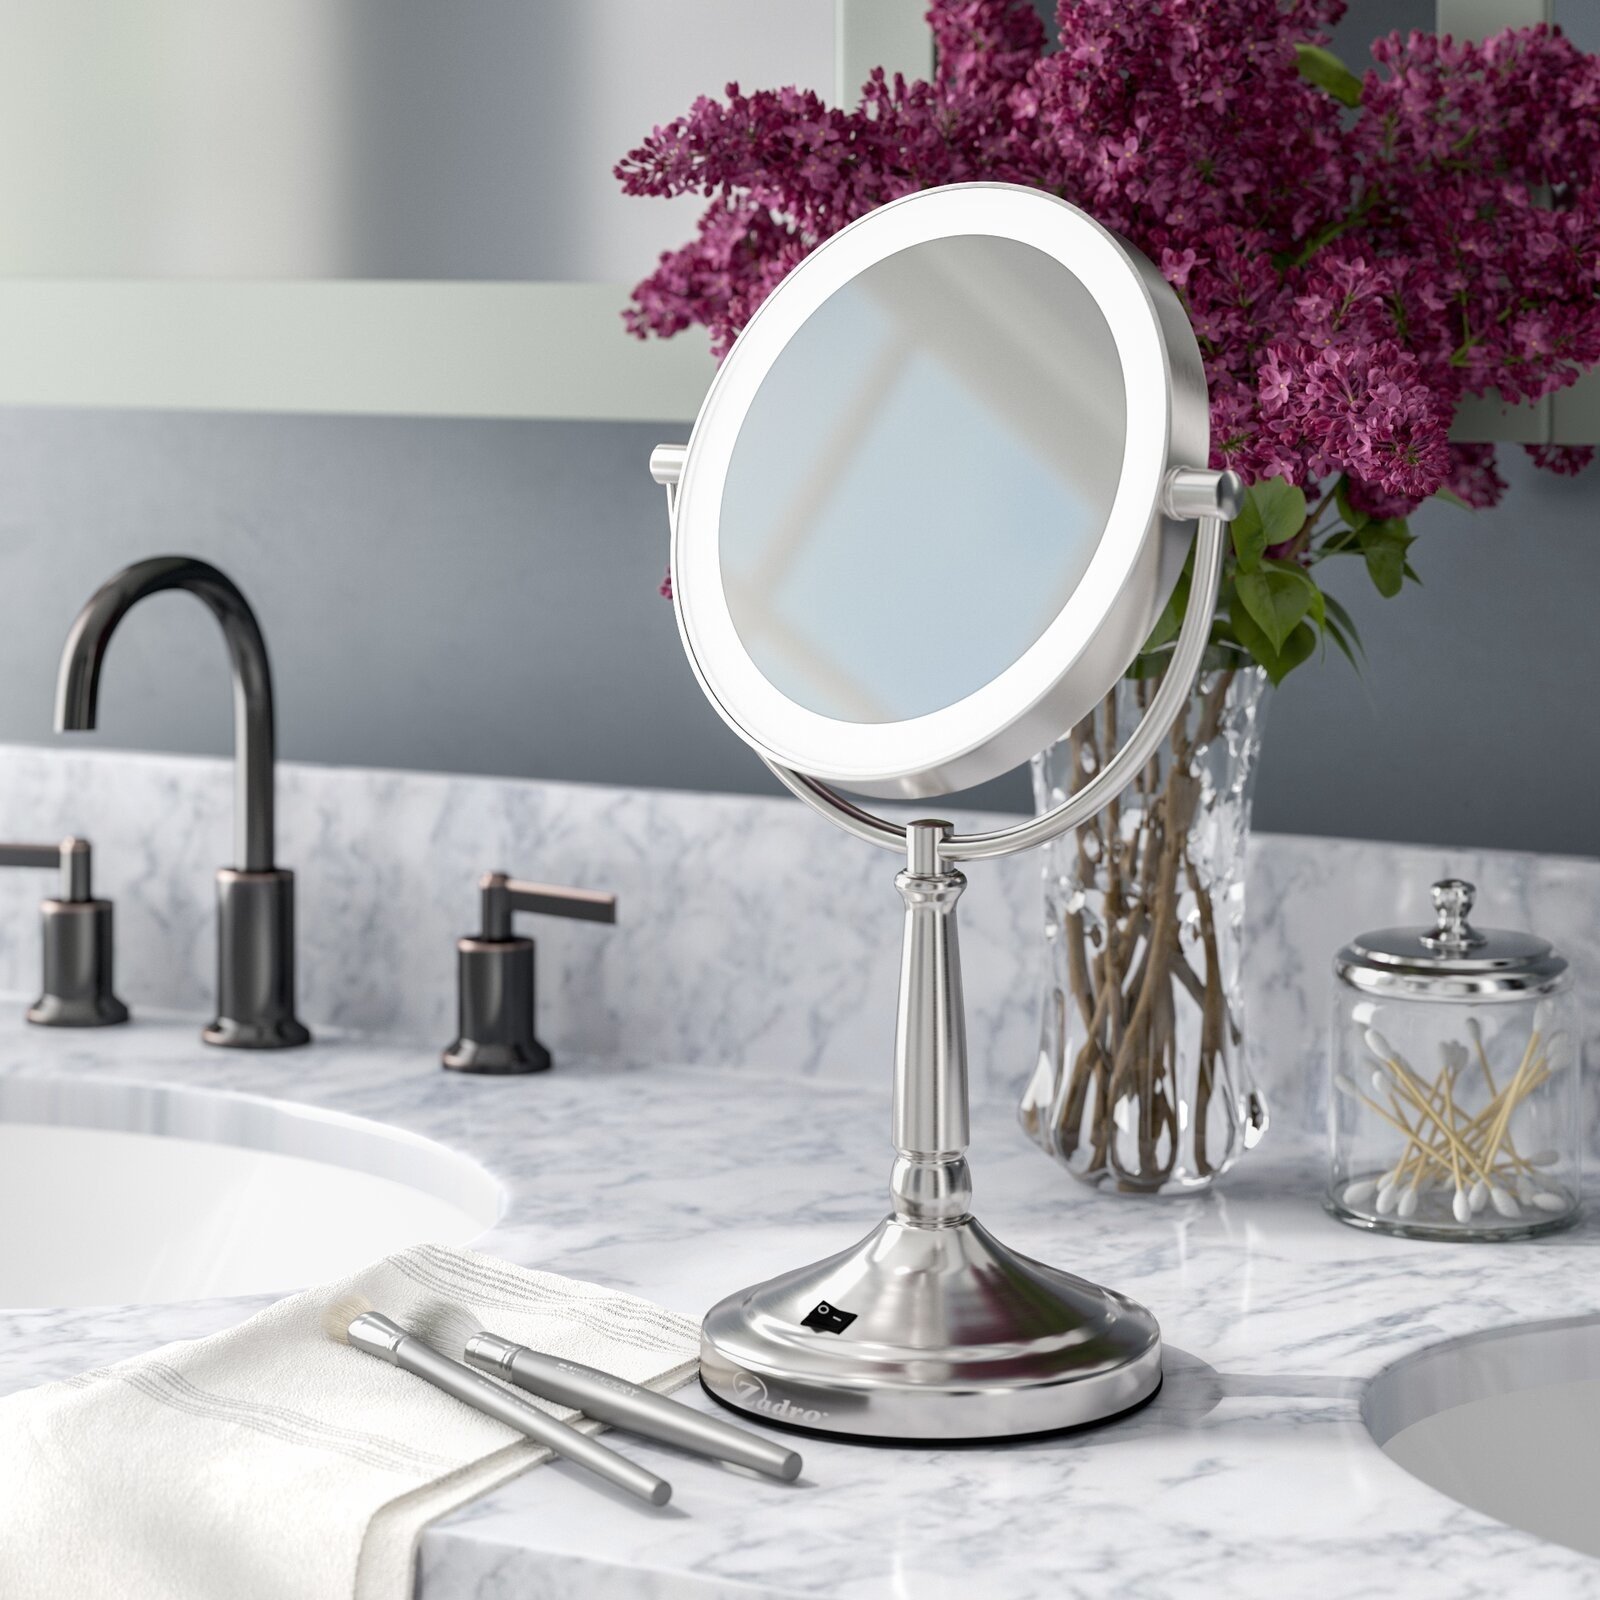 Top 9 Best Vanity Mirrors With Lights to look for